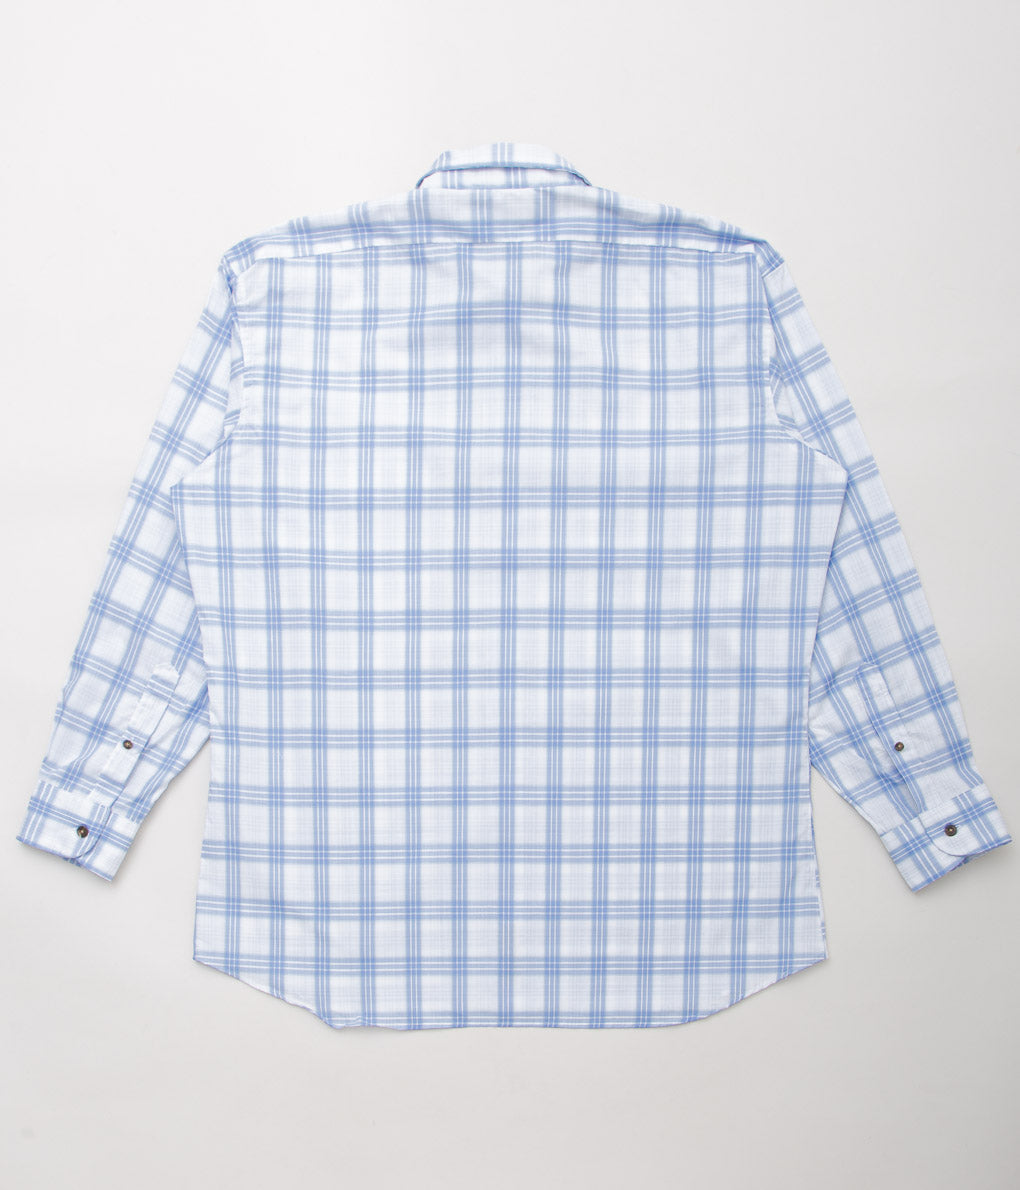 INDIVIDUALIZED SHIRTS×THE STORE BY MAIDENS "SLOB WORKERS SHIRTS"(BLUE CHECK)